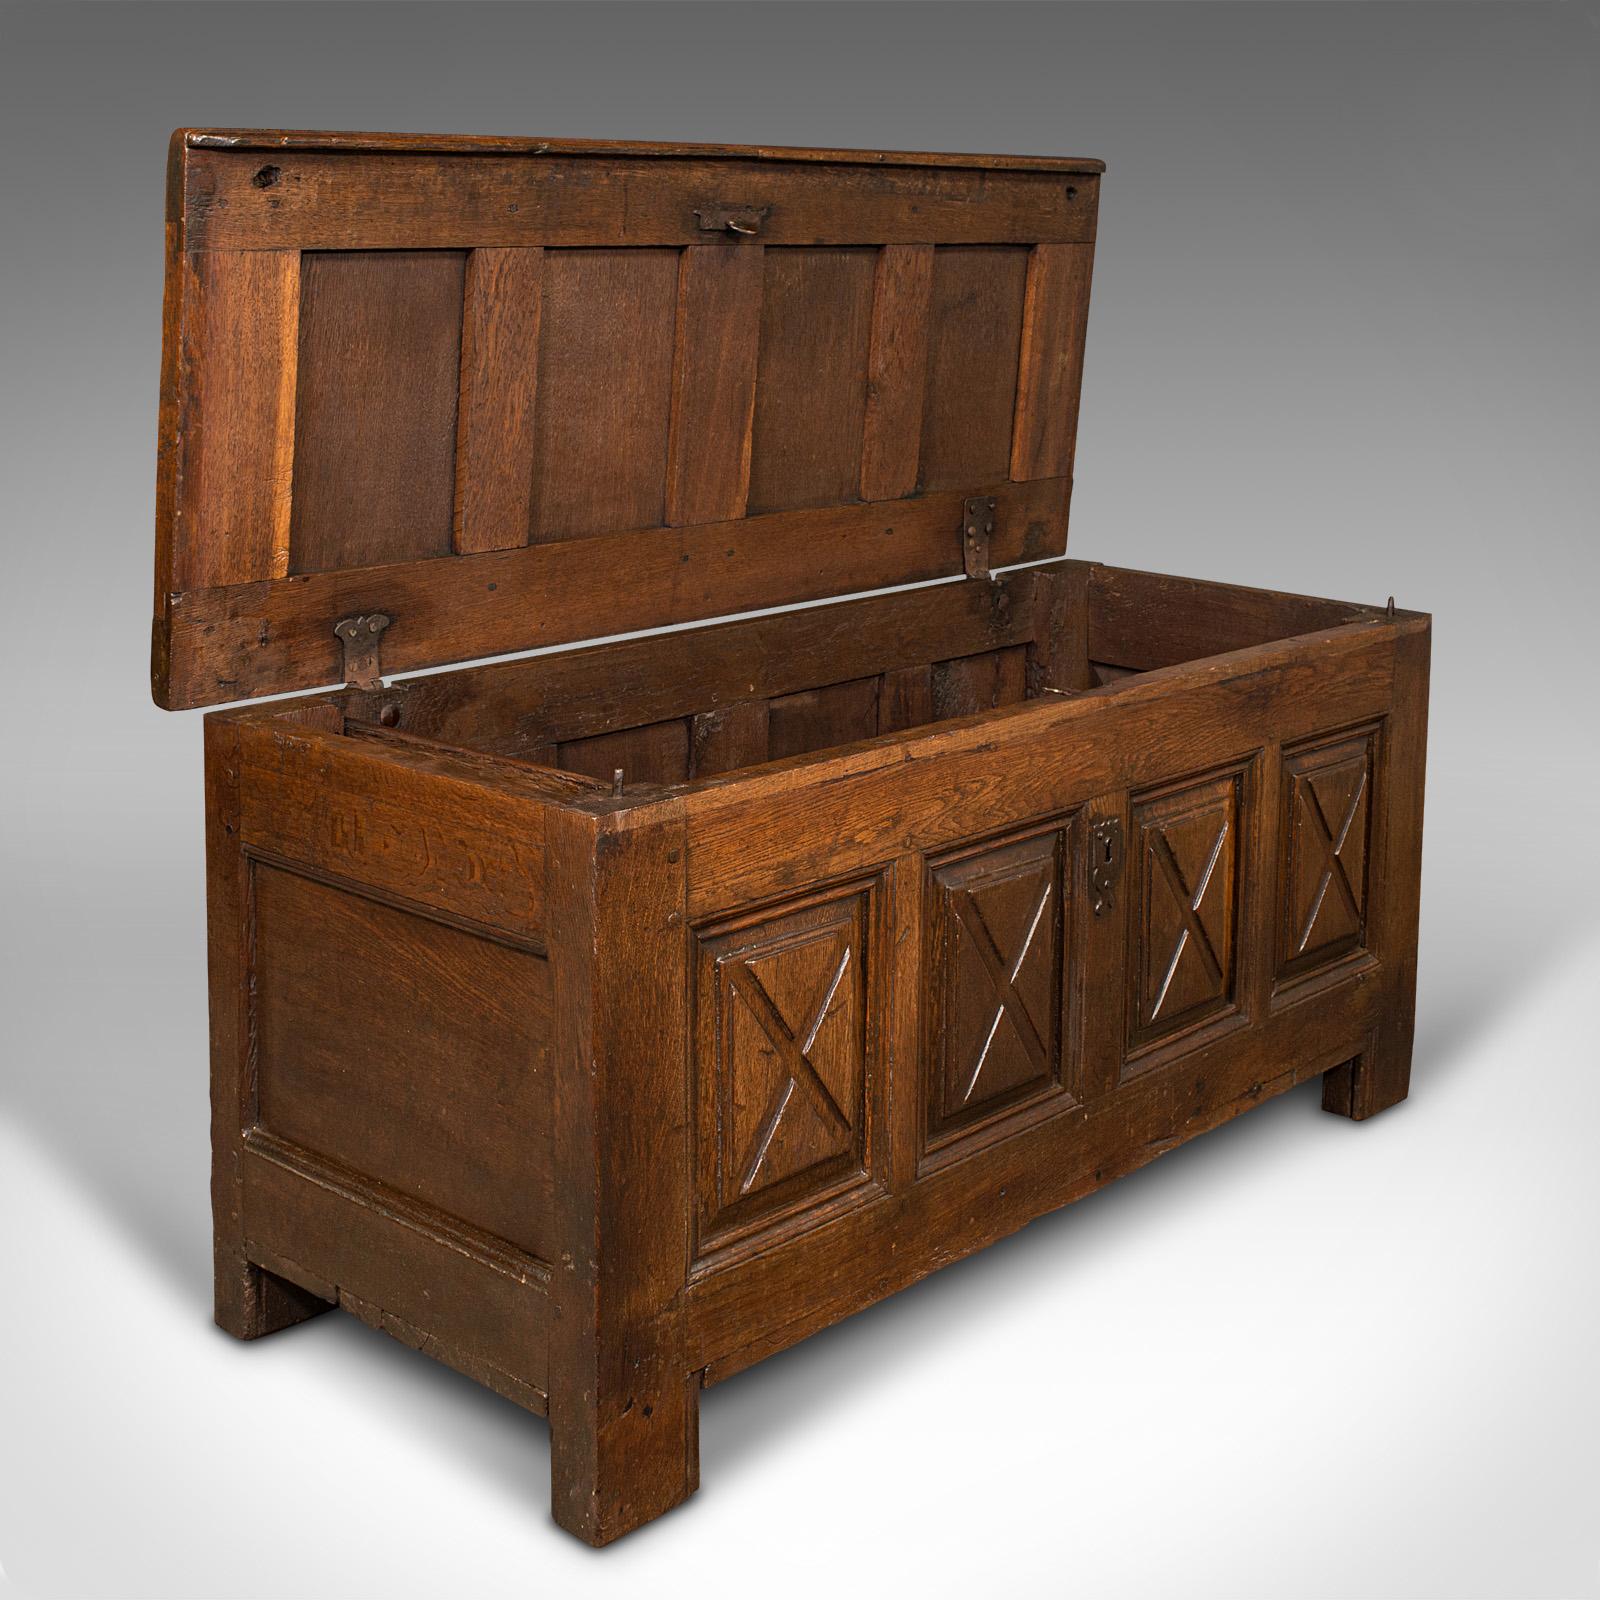 This is a large antique four panel coffer. A Scottish, oak chest or window seat, dating to the Georgian period, circa 1750.

Superb Scottish example from the George II period.
Displays a desirable aged patina and in good order